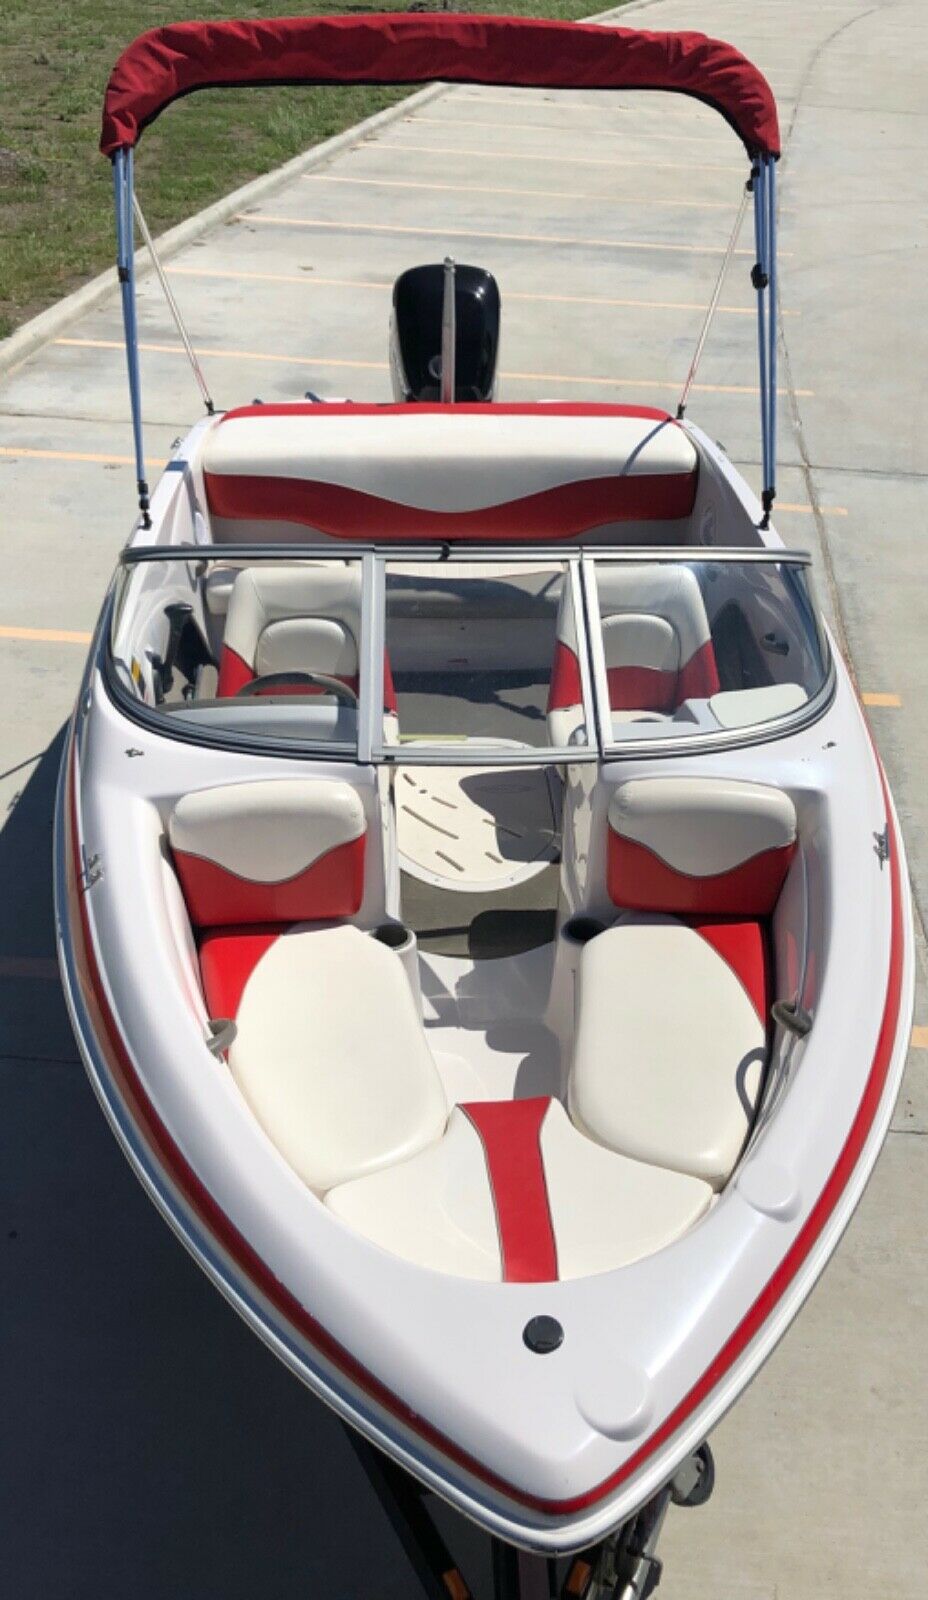 Tahoe 2004 for sale for $10,200 - Boats-from-USA.com